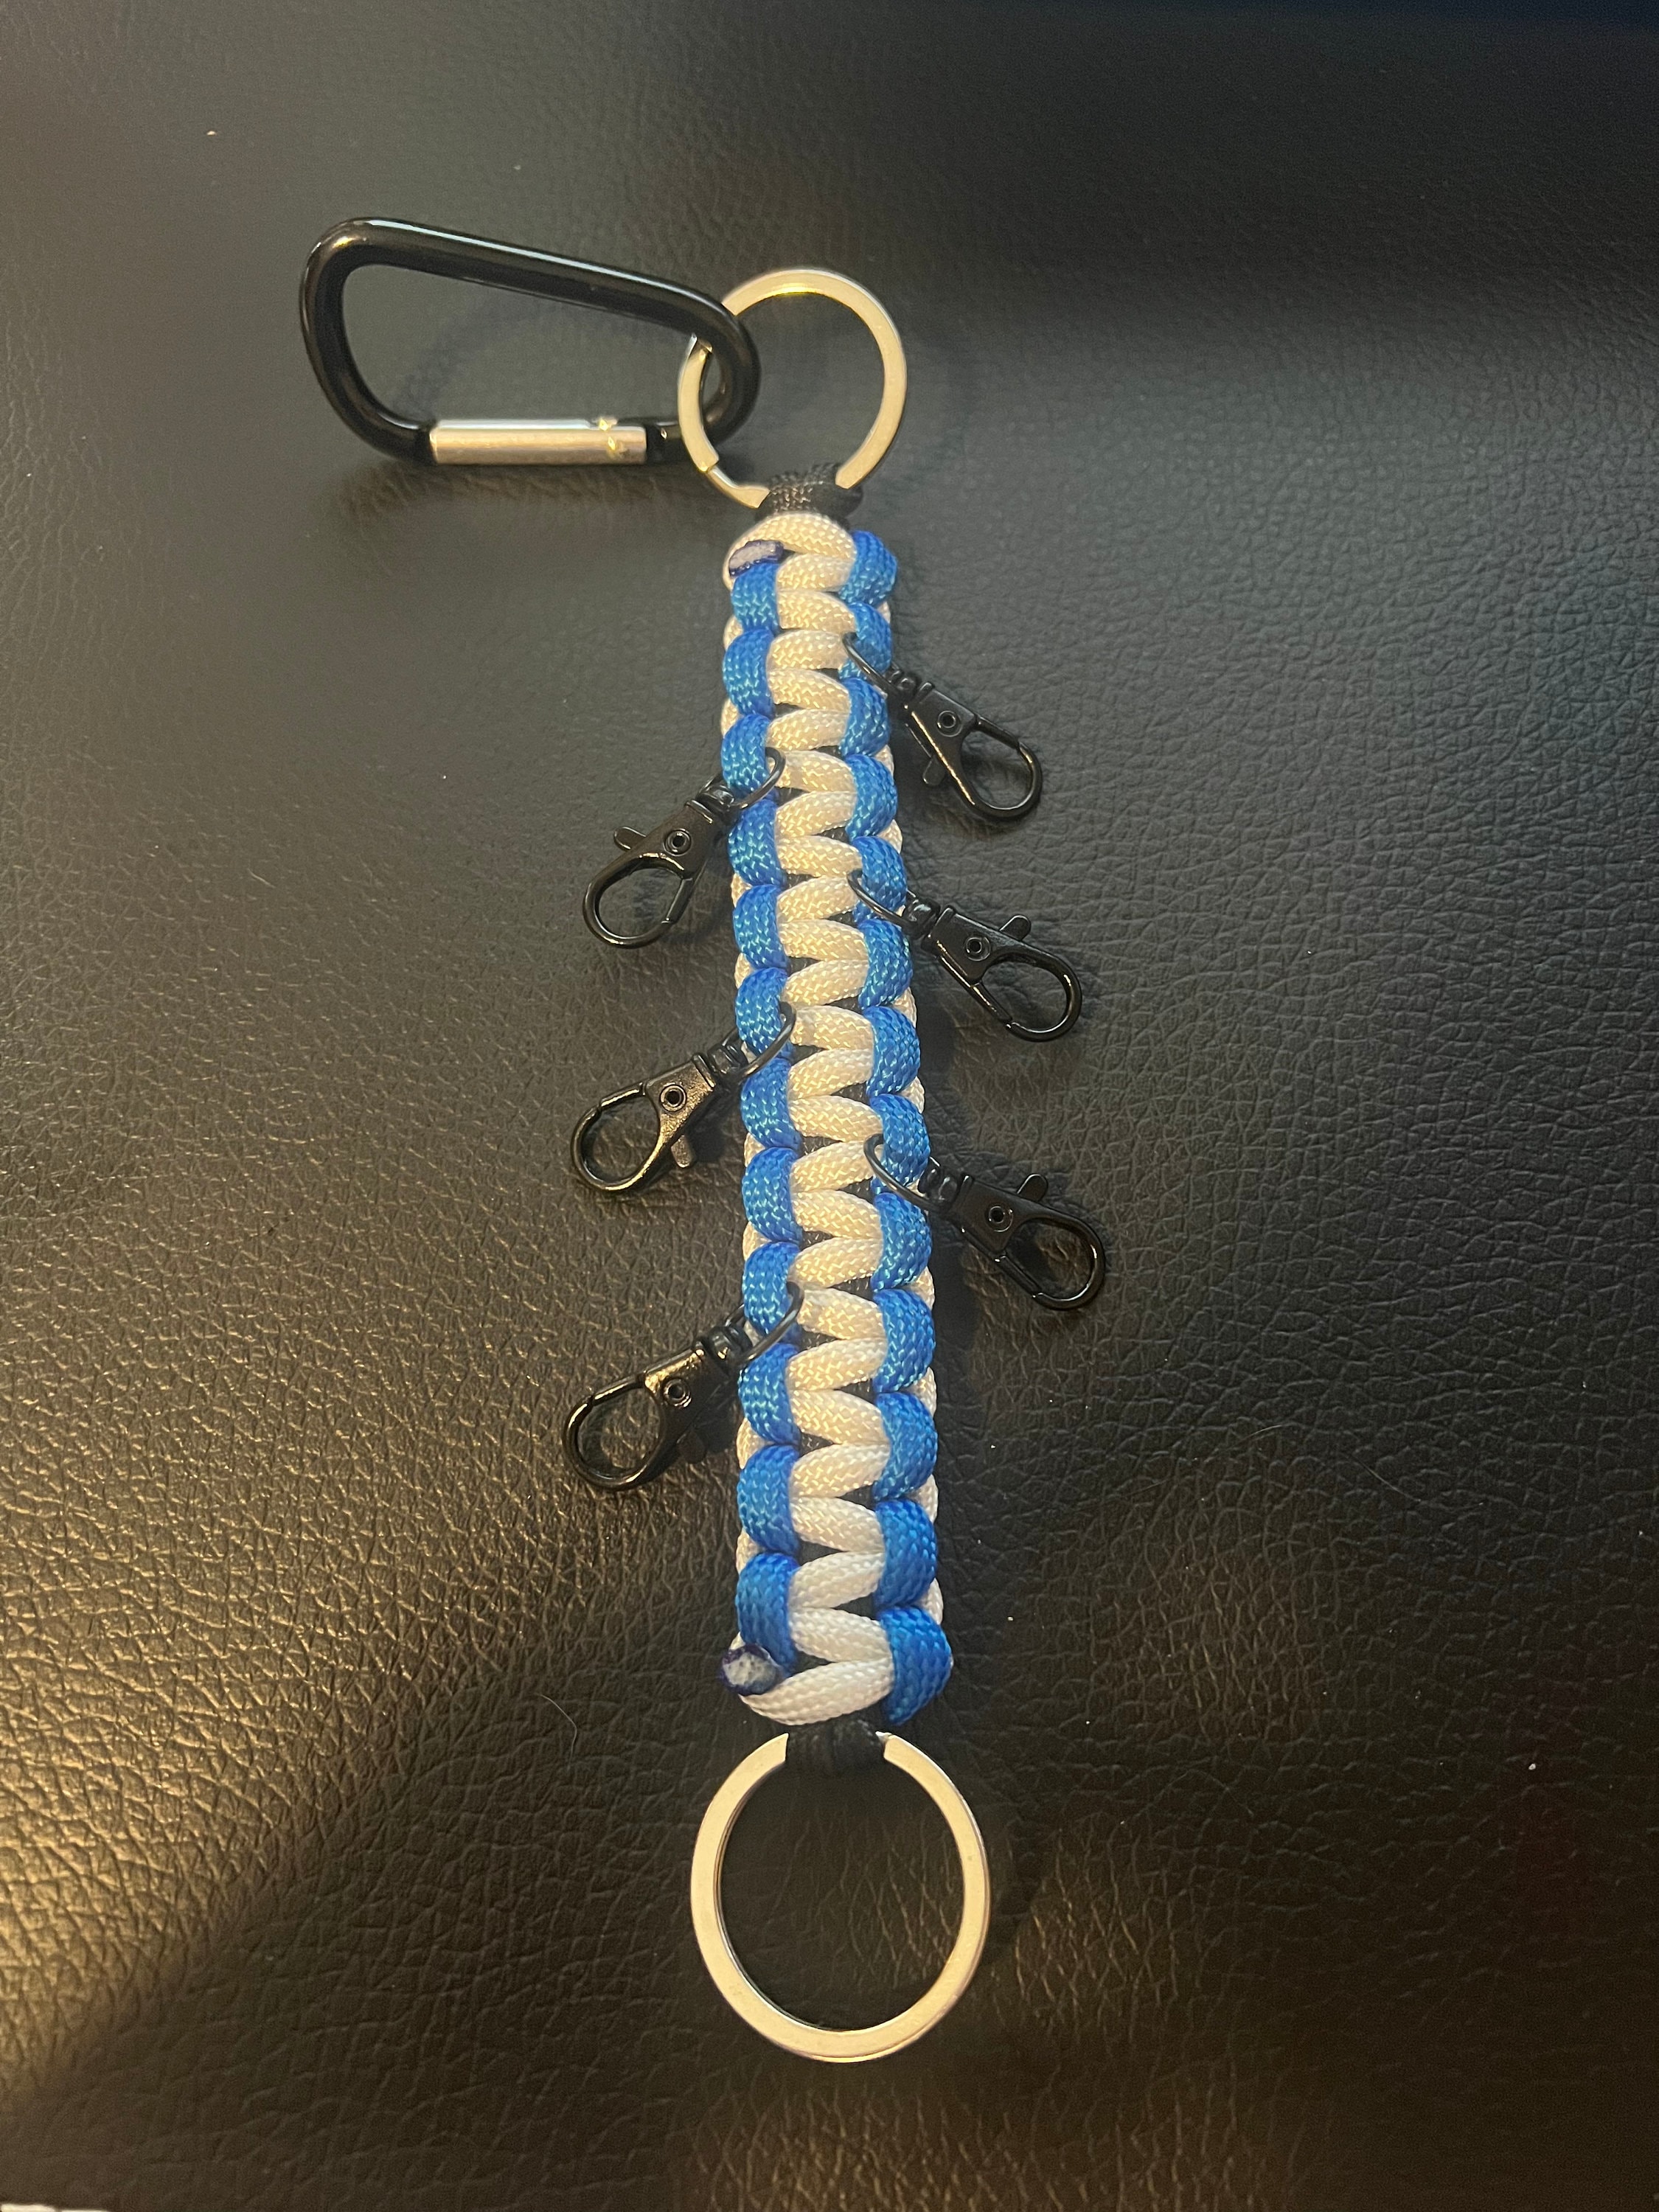 Paracord Cheer Bows Holder Keychain Handmade in the USA